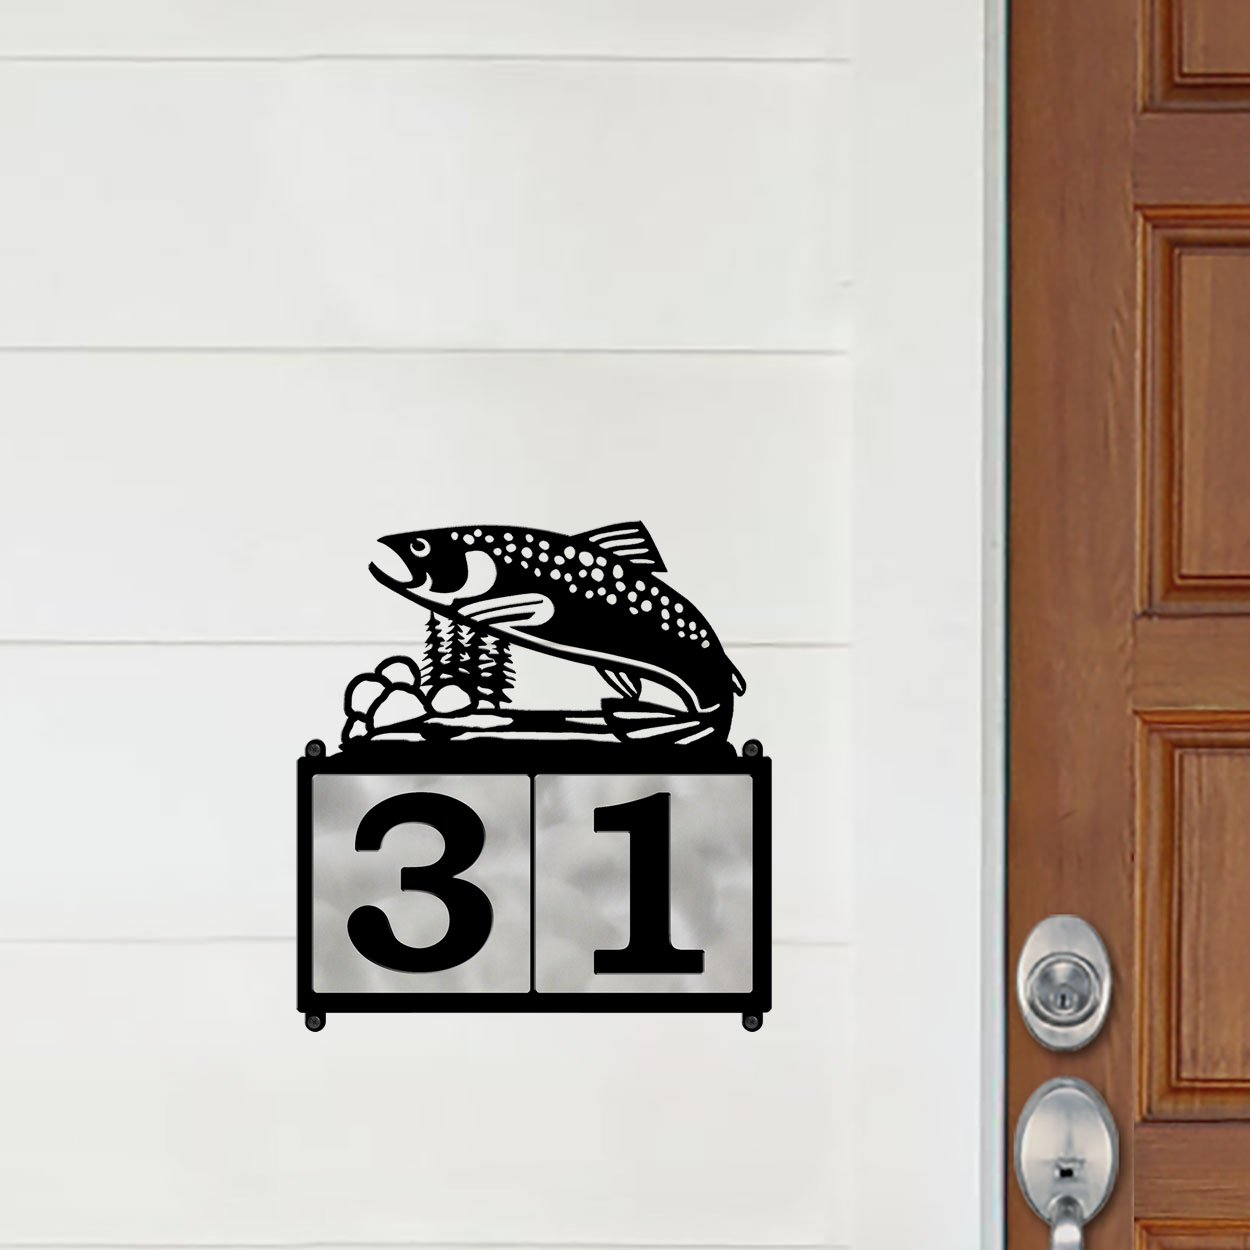 609252 - XL Jumping Trout in Stream Design 2-Digit Horizontal 6in Tile Outdoor House Numbers